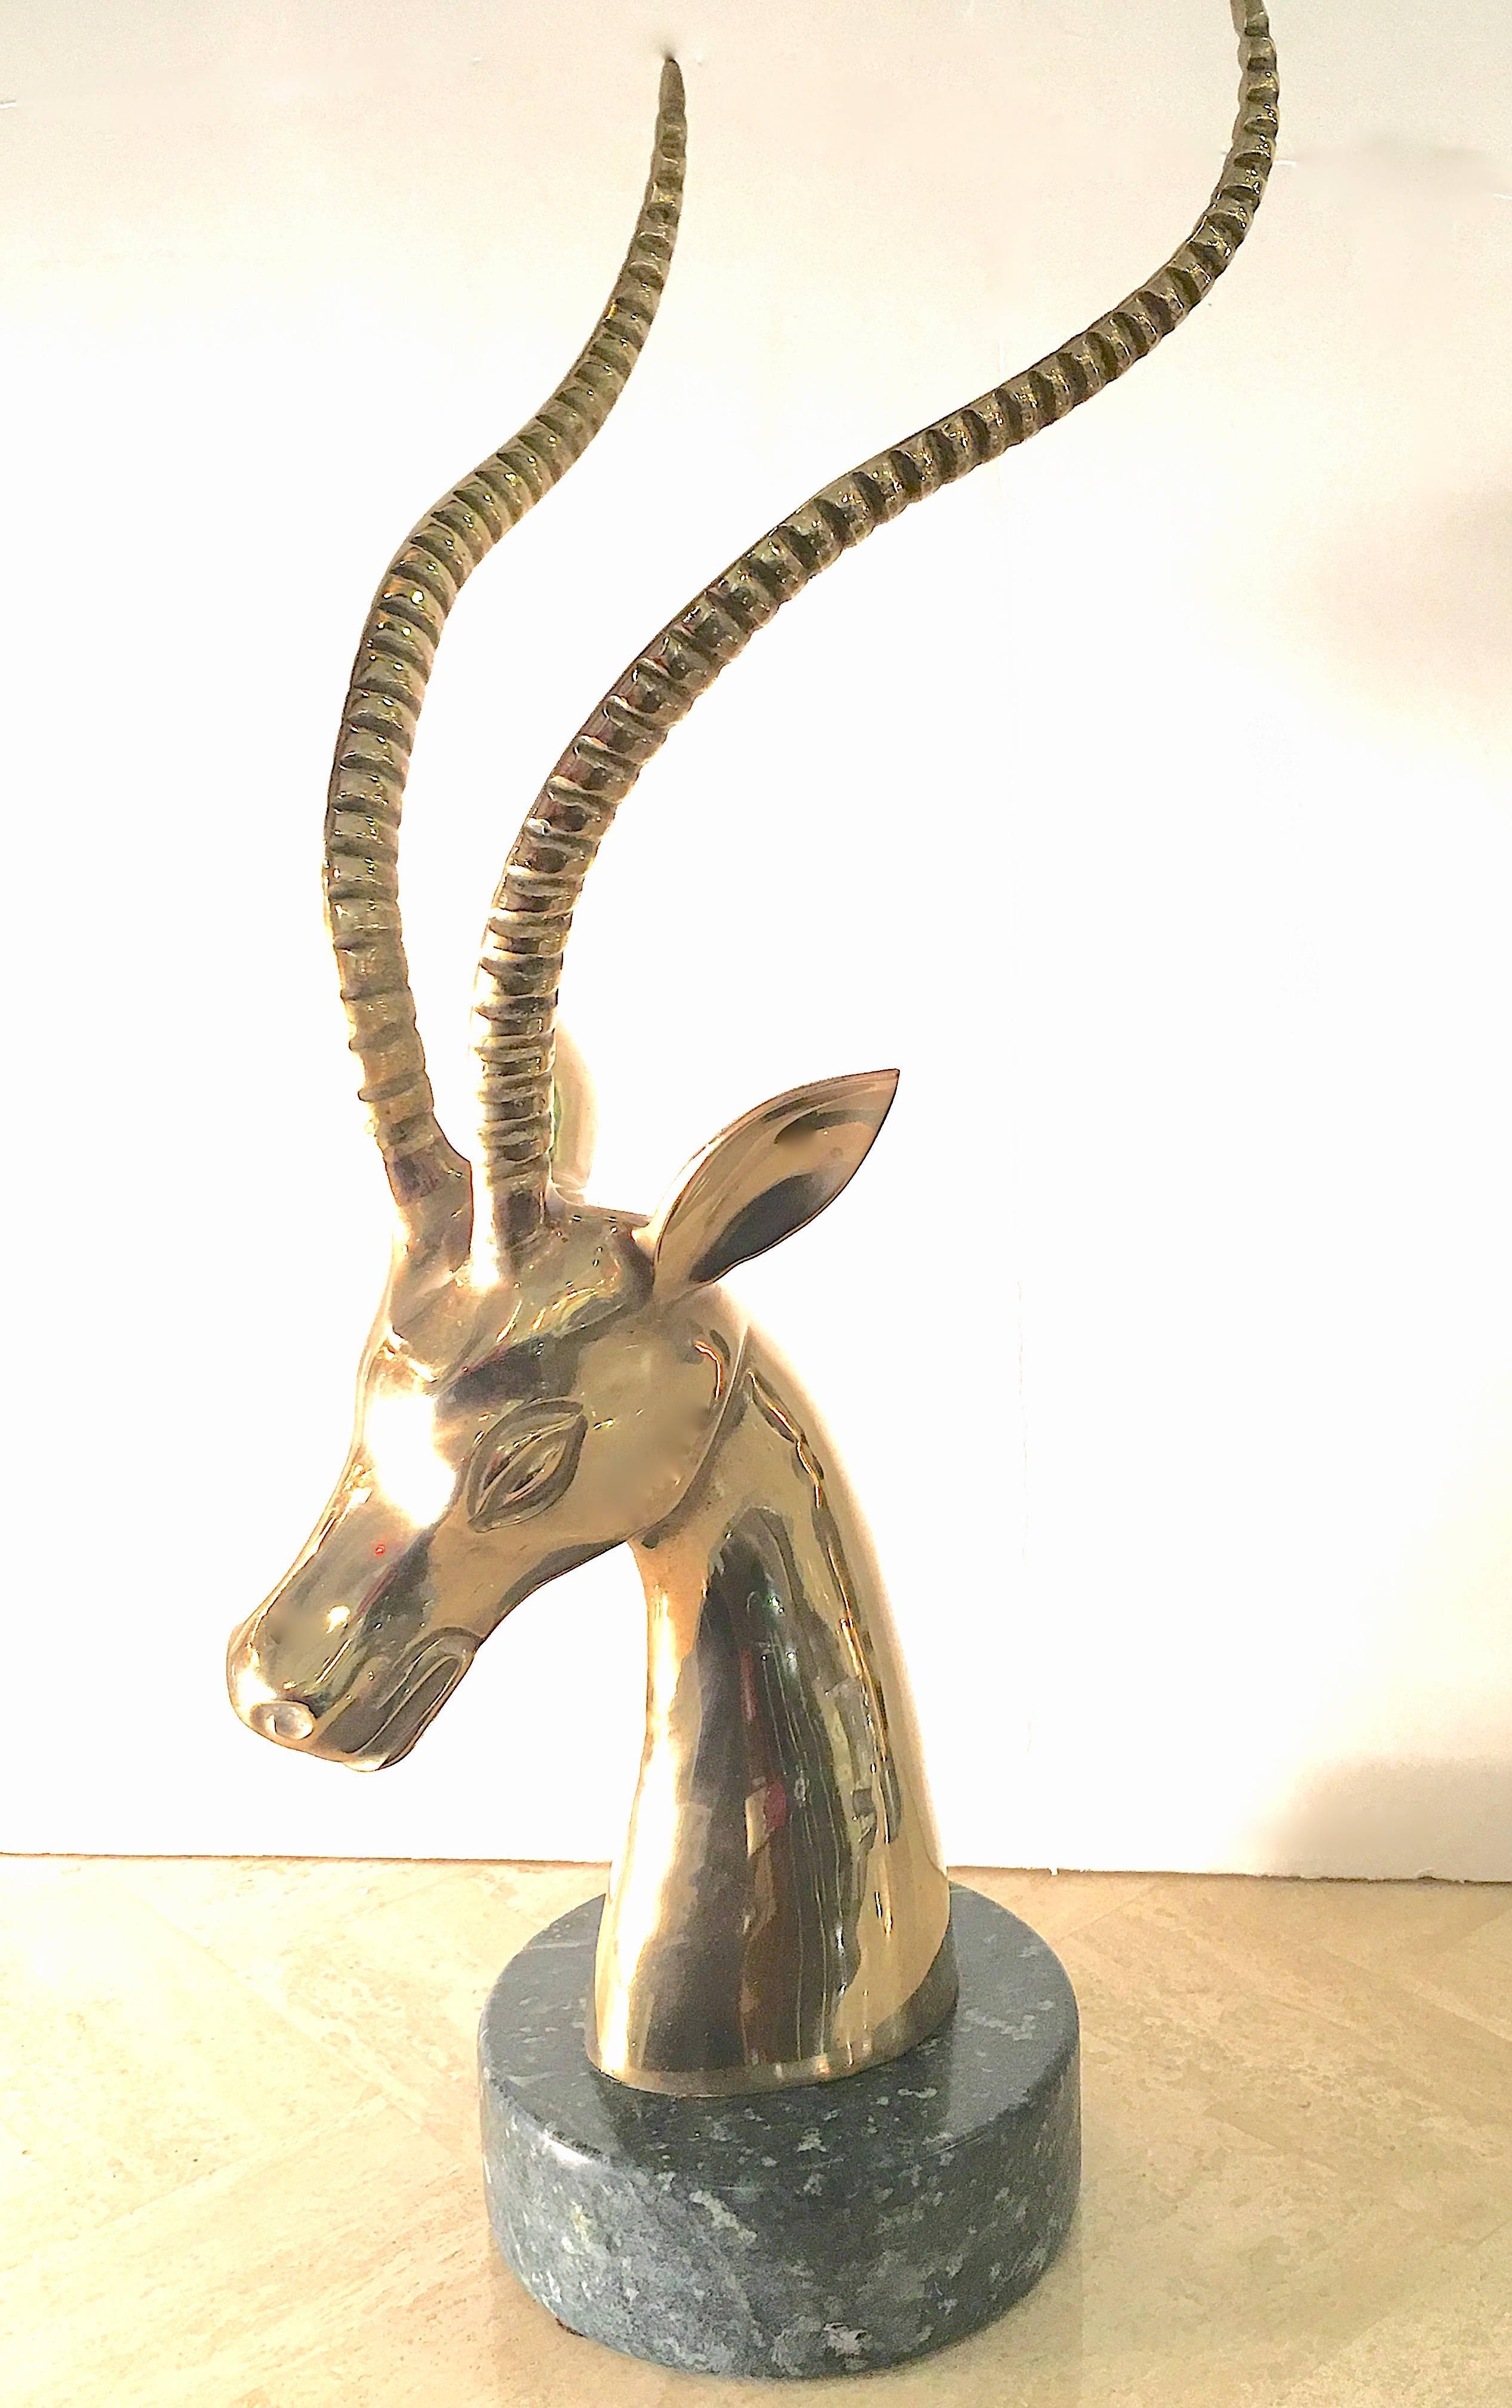 Pair of large-scale brass gazelles or ibexes mounted on green marble bases. Impressive! Please contact for location. 